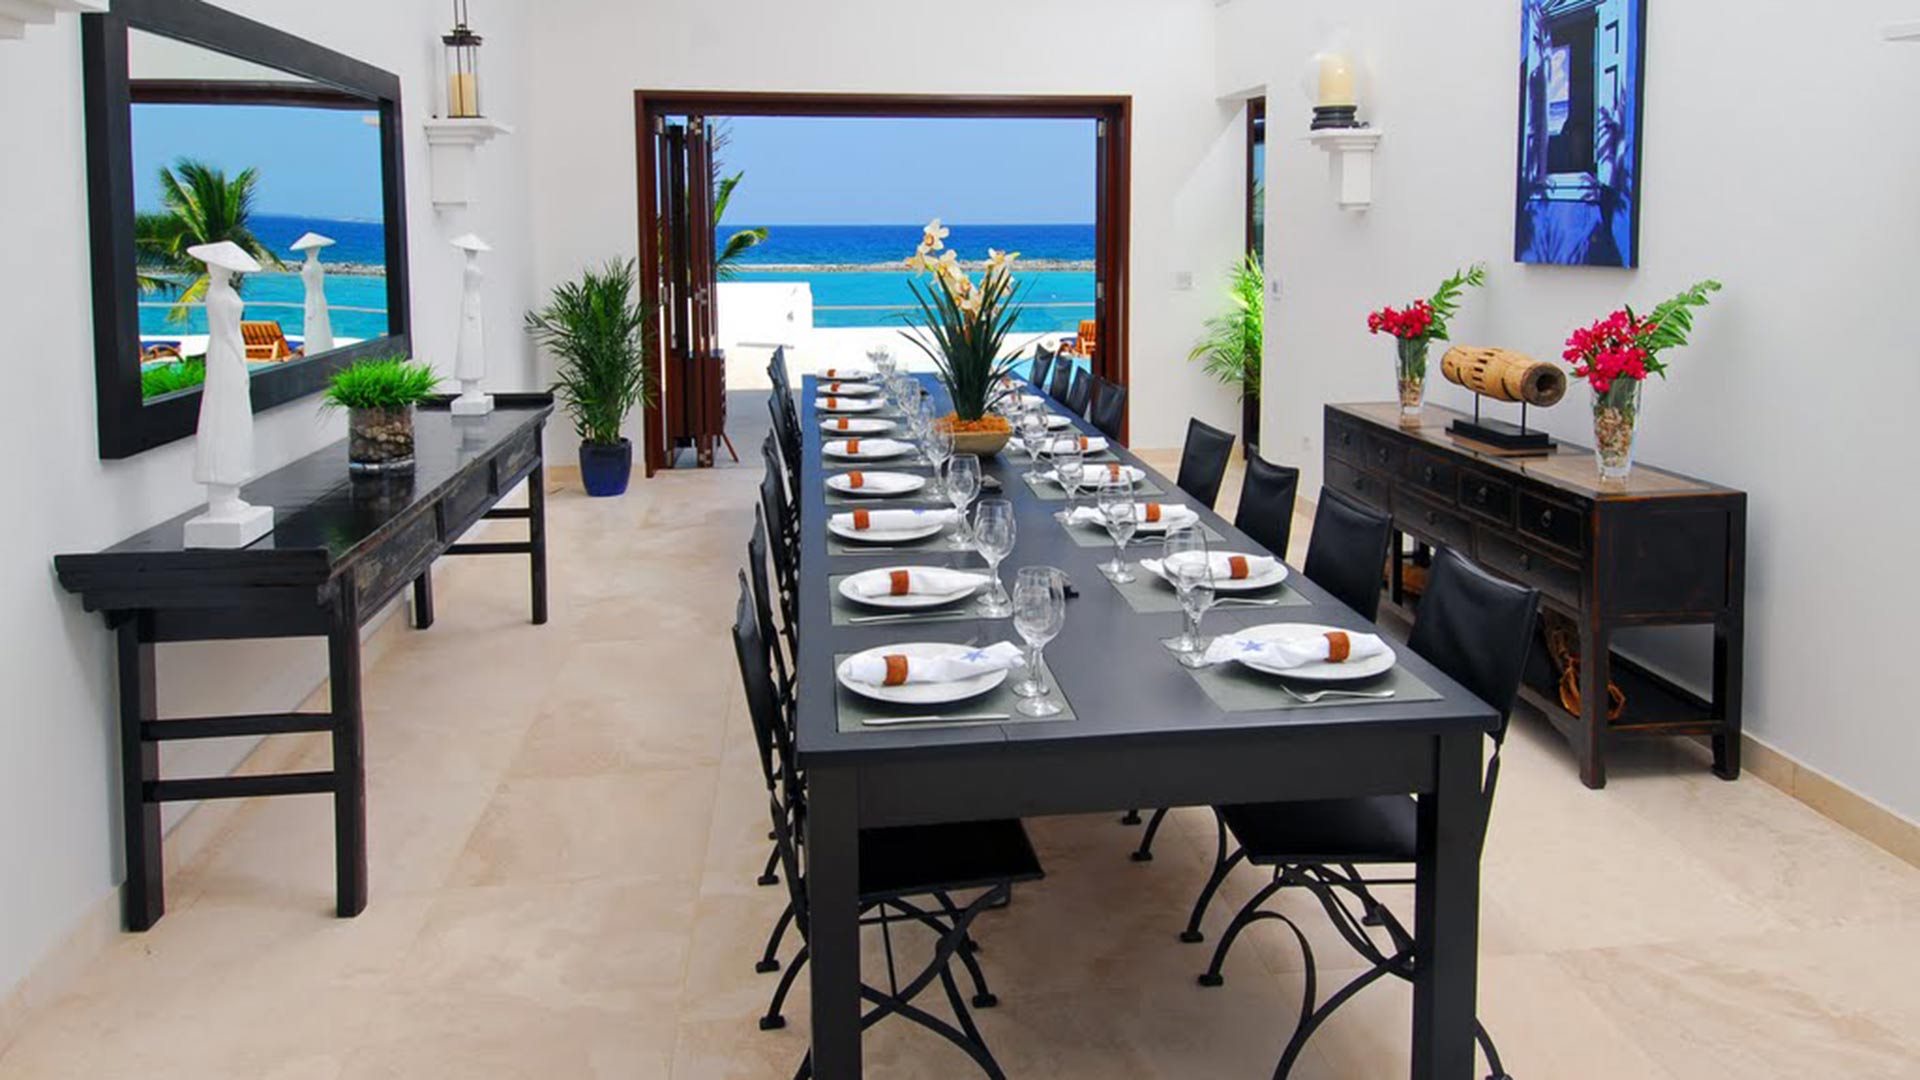 Both elegant indoor dining and casual outdoor dining areas are offered at this stunning luxury Anguilla villa rental.
